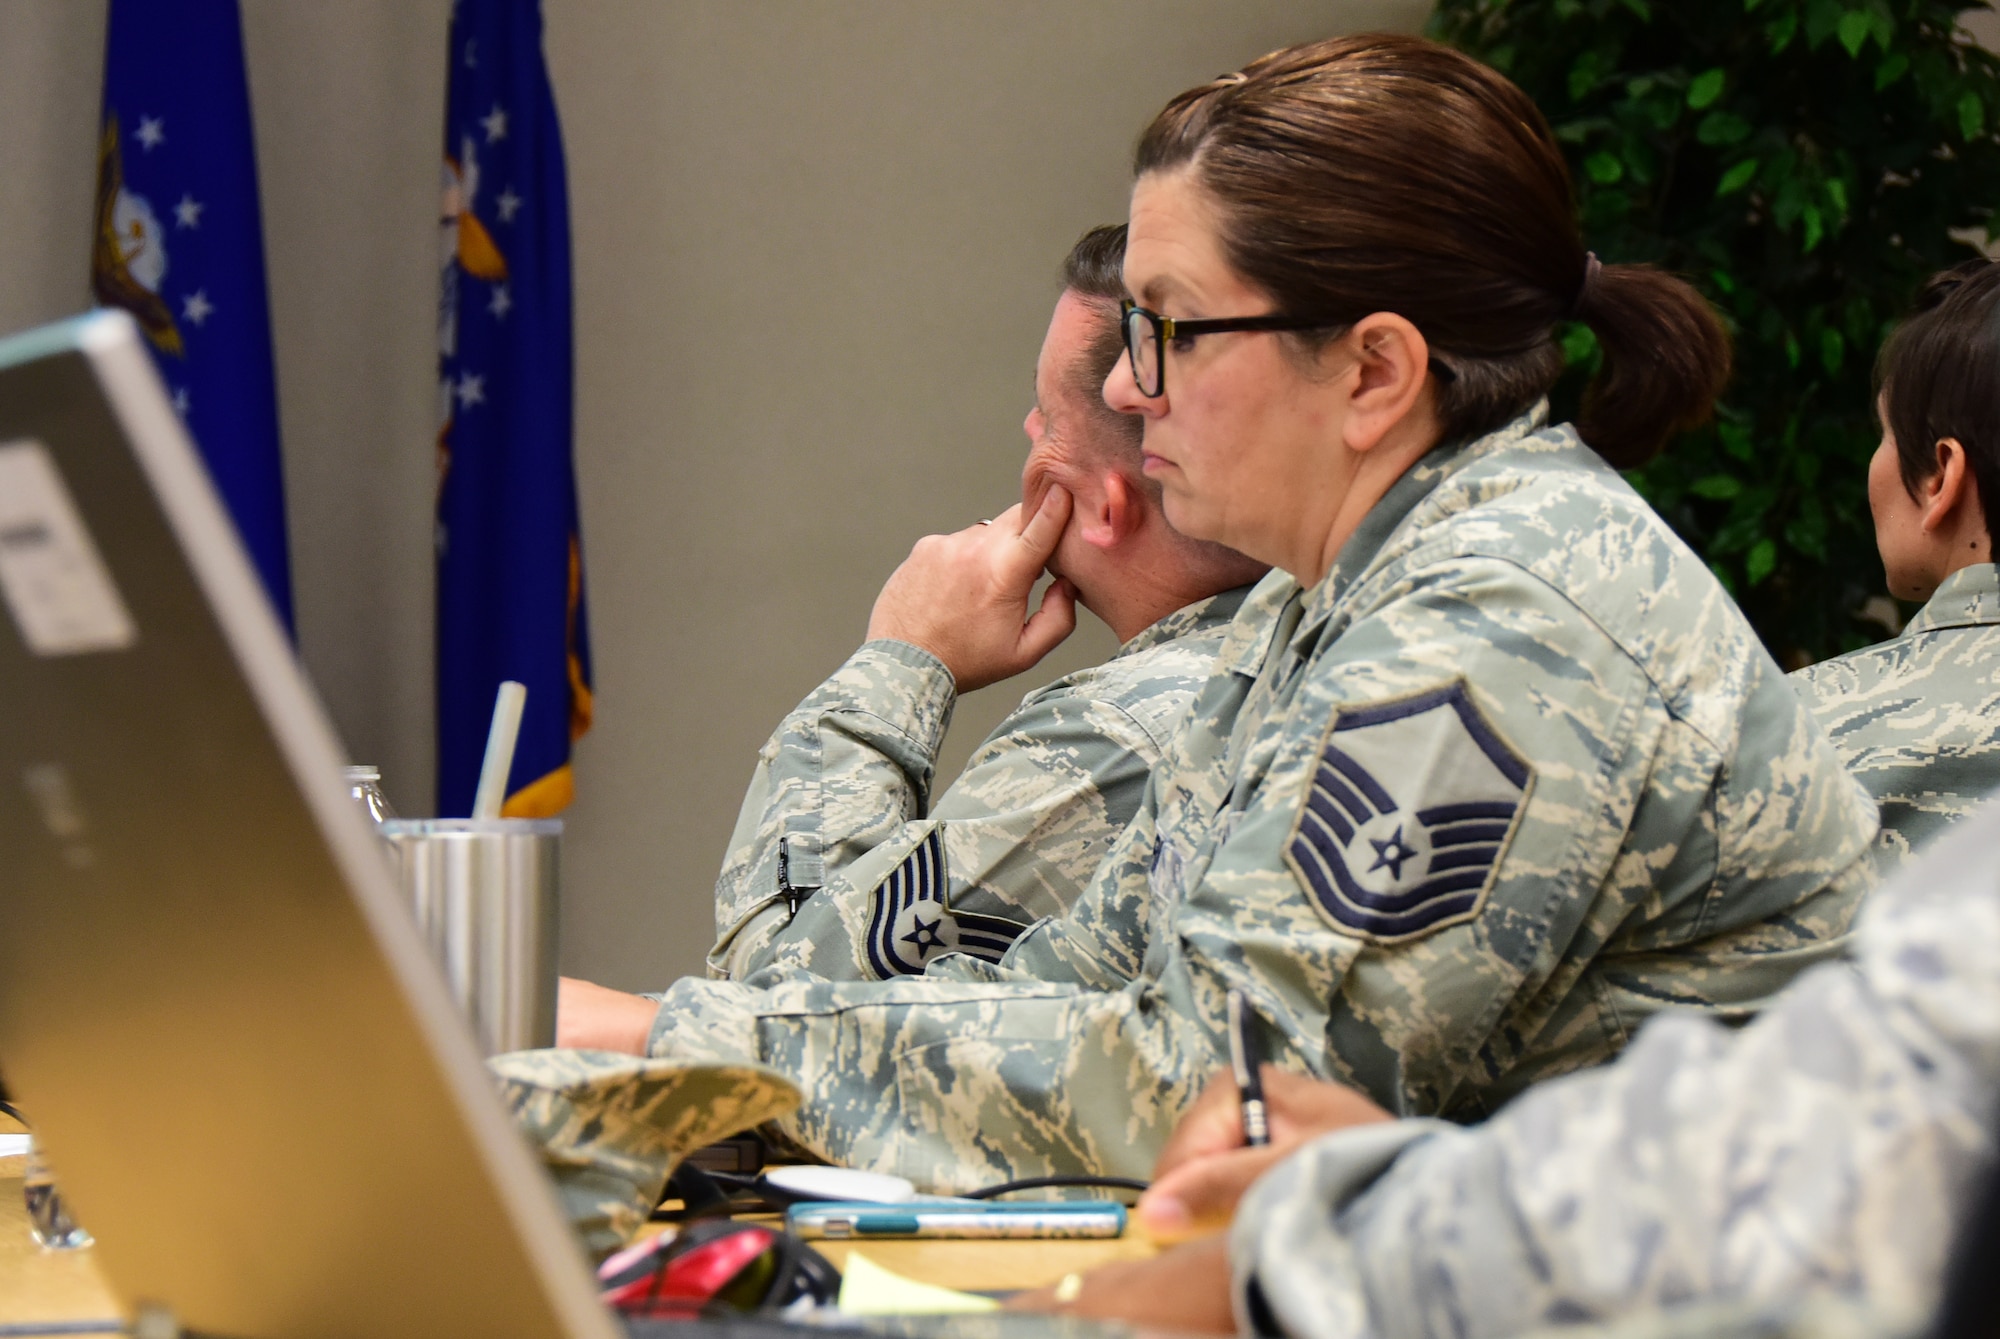 Airmen from the 118th Wing participate in a professional writing class on Oct. 1, 2016 in Nashville, Tenn. Two visiting enlisted professional military education instructors taught the class on how to improve their effective writing skills. (Air National Guard photo by Airman 1st Class Anthony Agosti/Released)